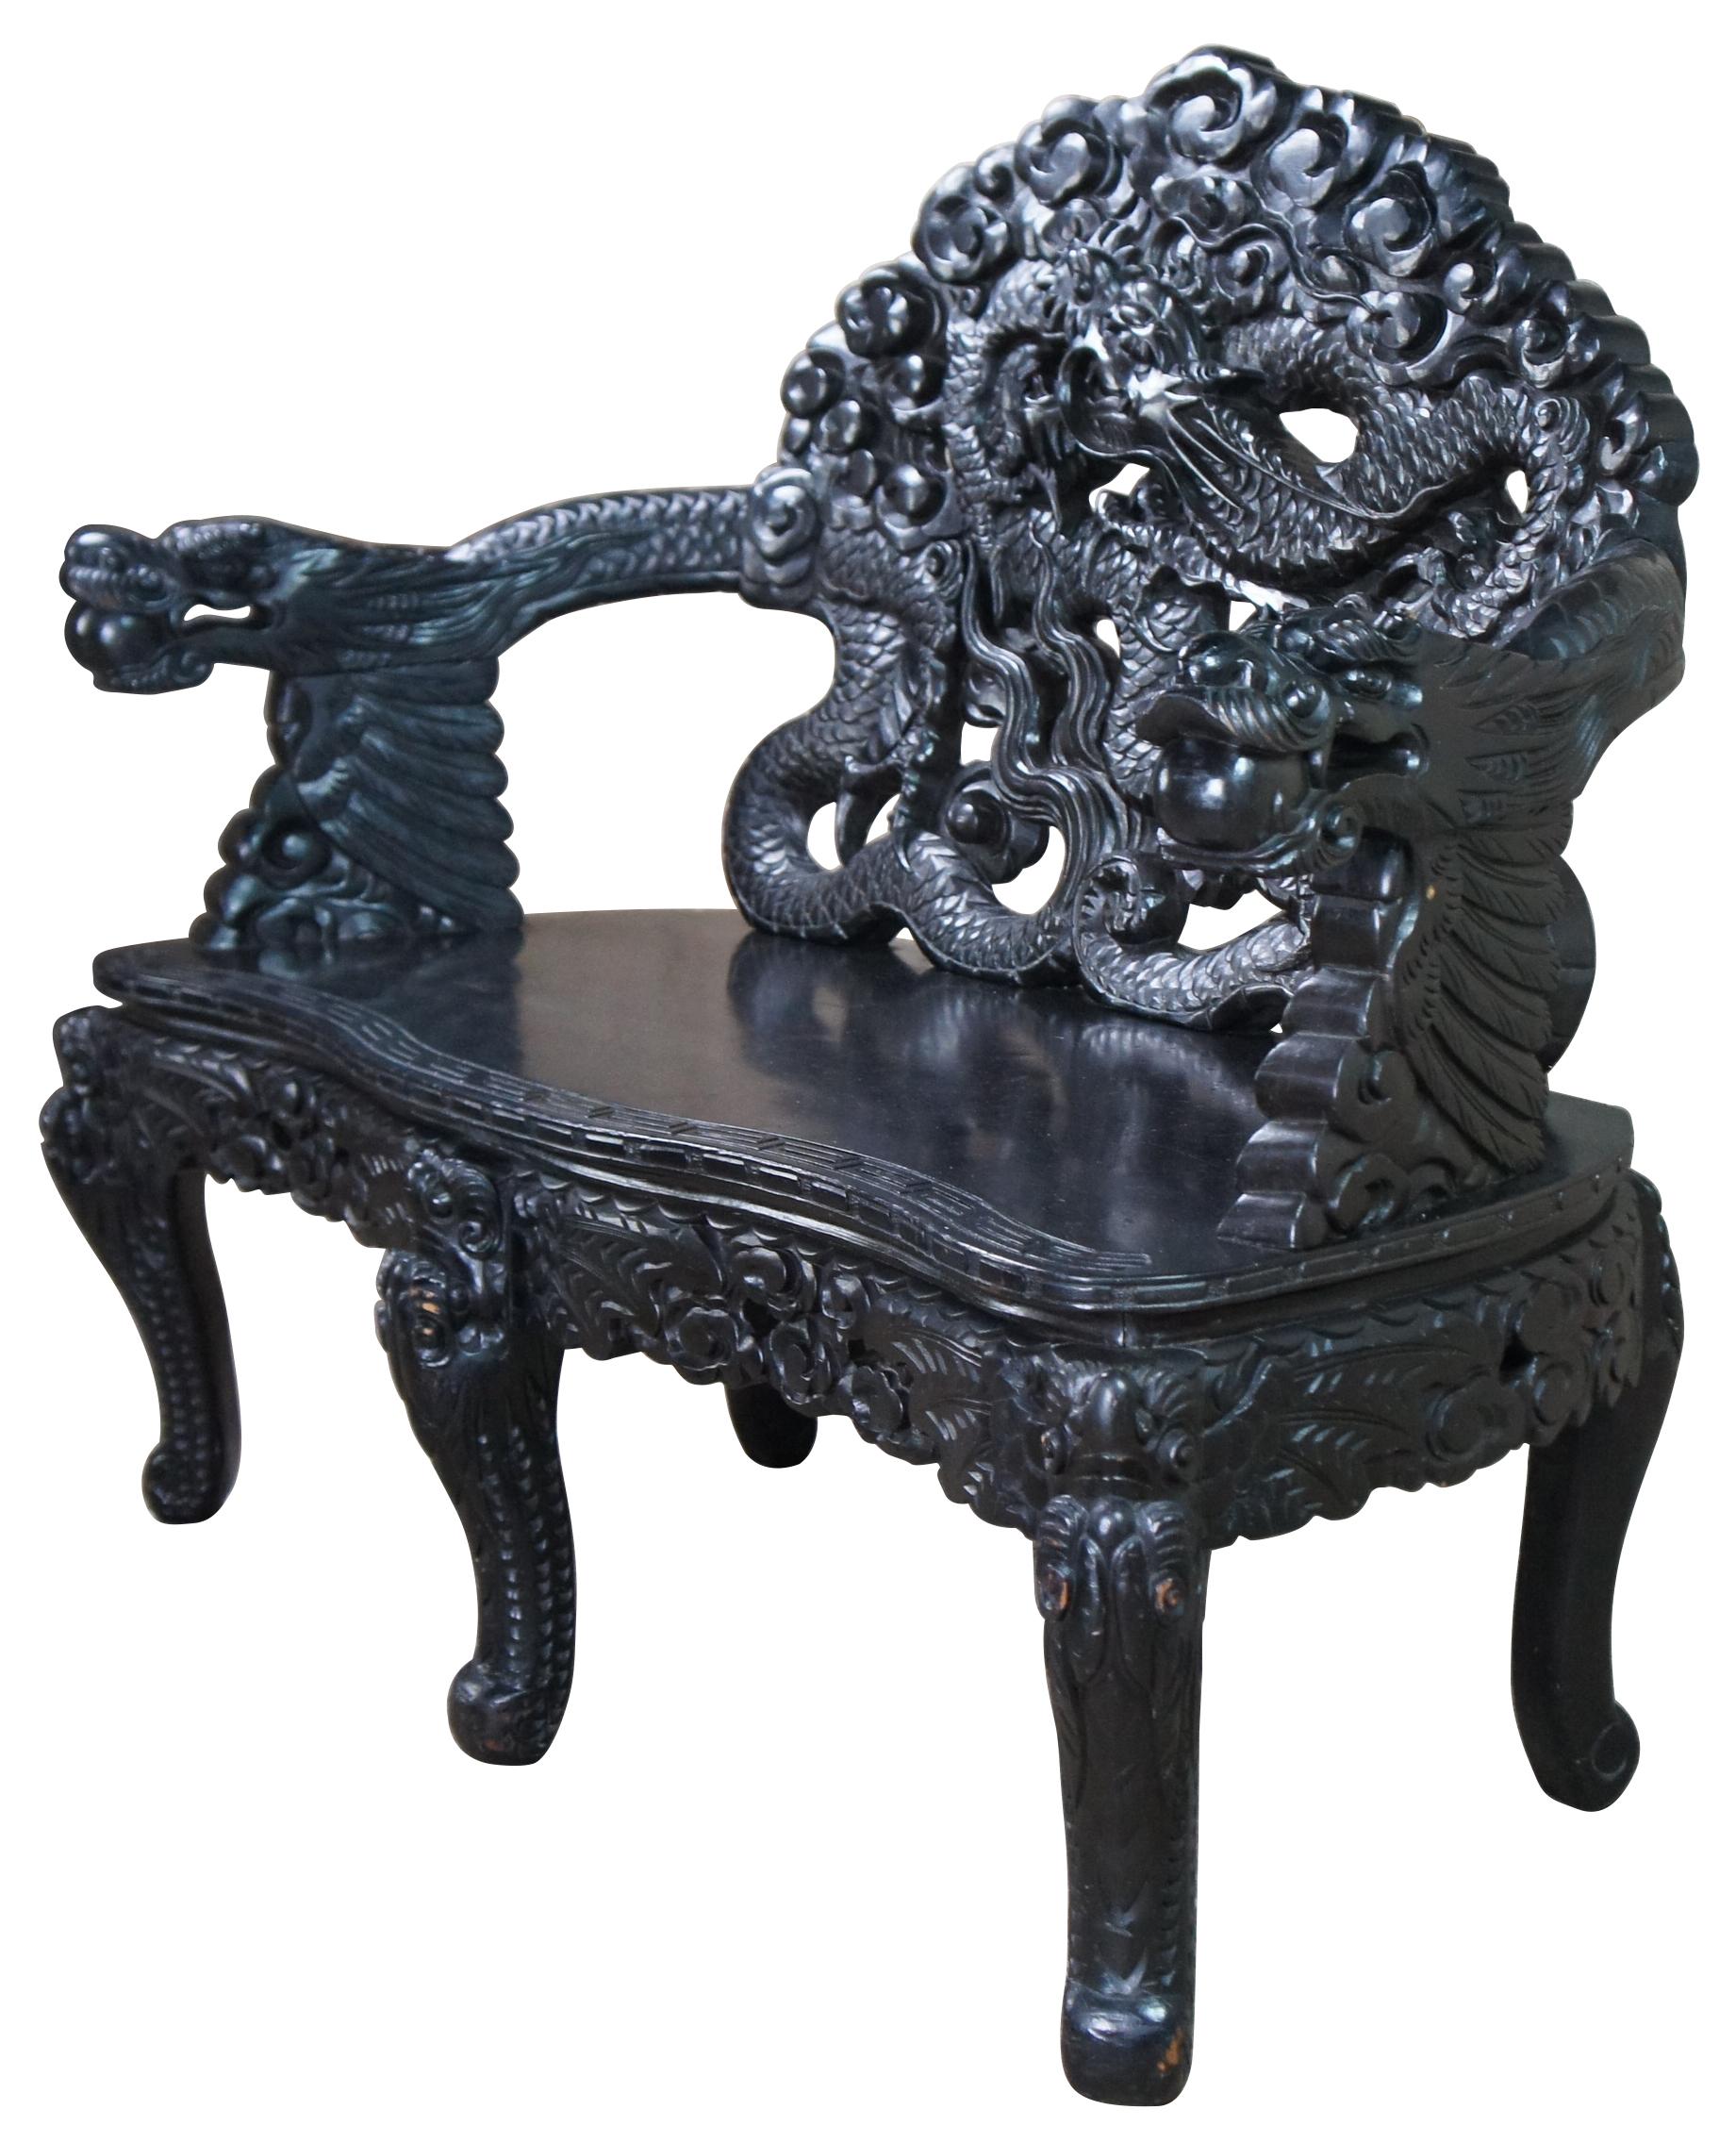 A fine and impressive Imperial Japanese Meiji Period Dragon bench. Features high relief carving throughout. The arched and pierced back consists of 3 dragons. In the center is a large and intricate snarling three toed dragon. The other two wind